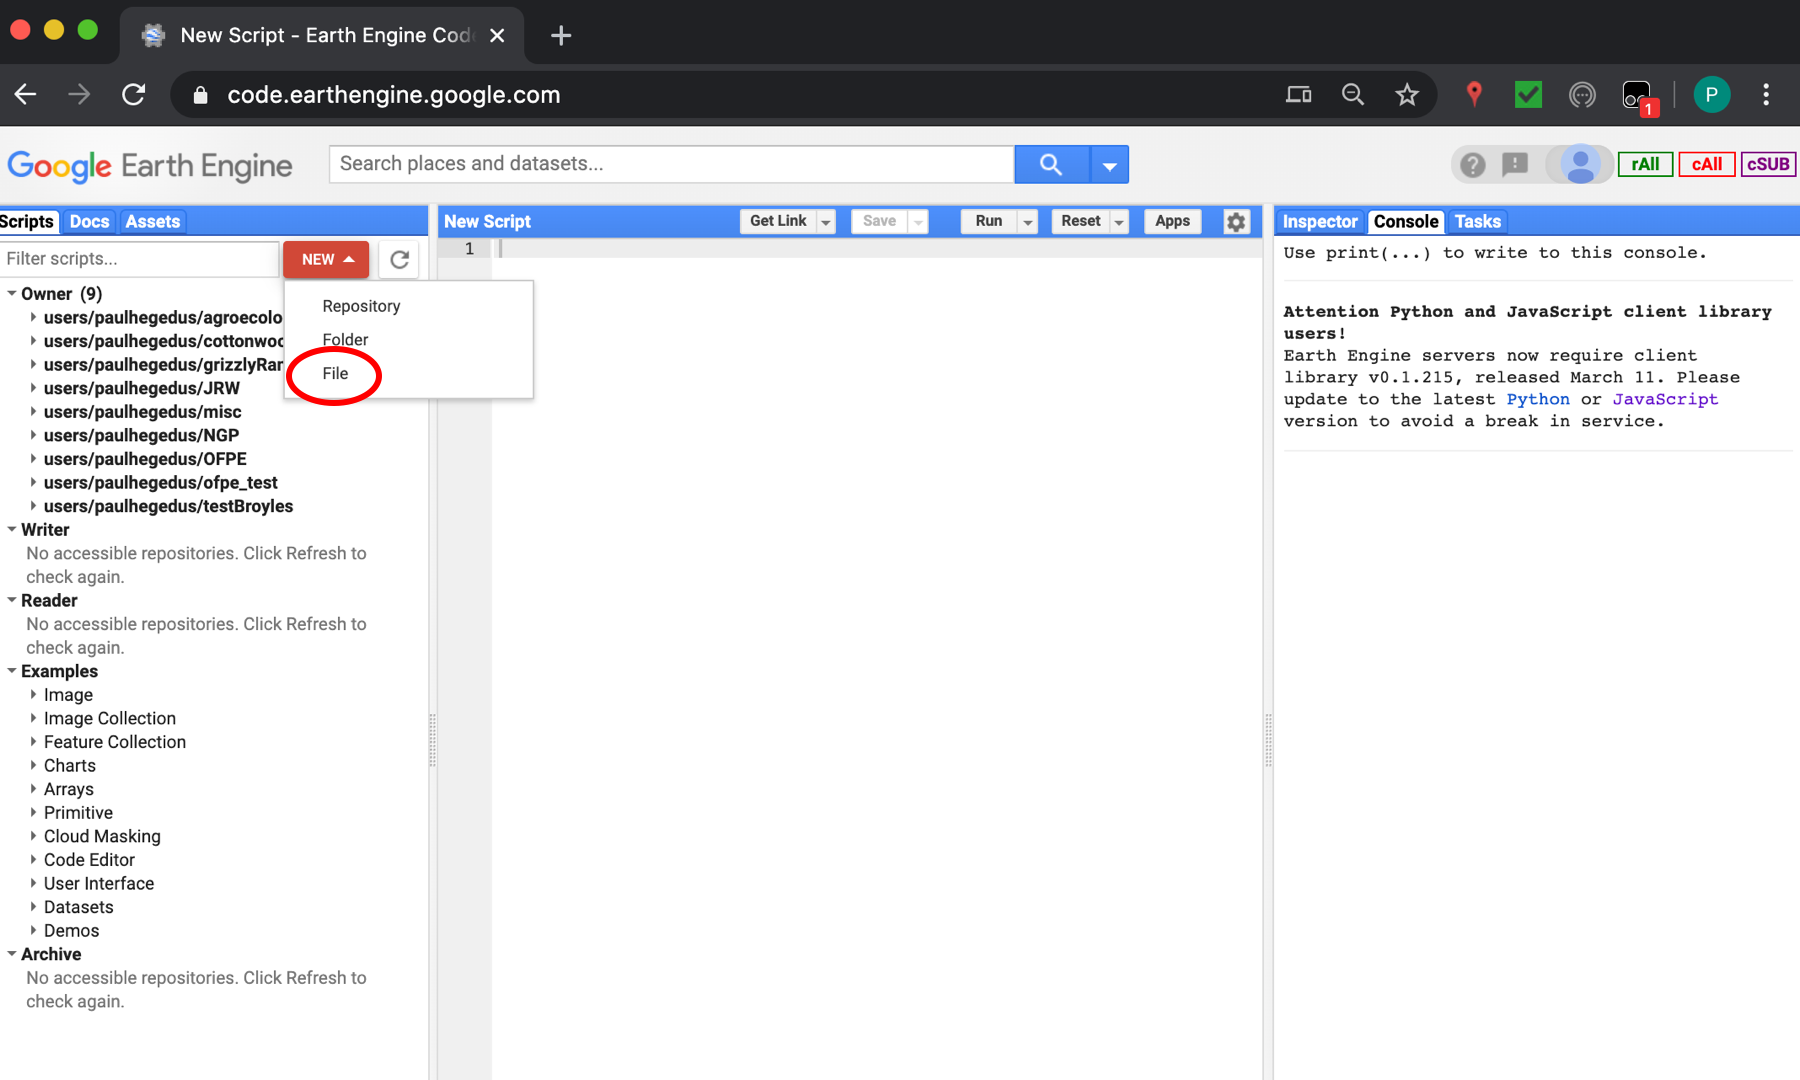 Note that you will likely not have any repositories in the left side pane of the Google Earth Engine page. Follow the steps for any repositories or folders you desire before creating the file.